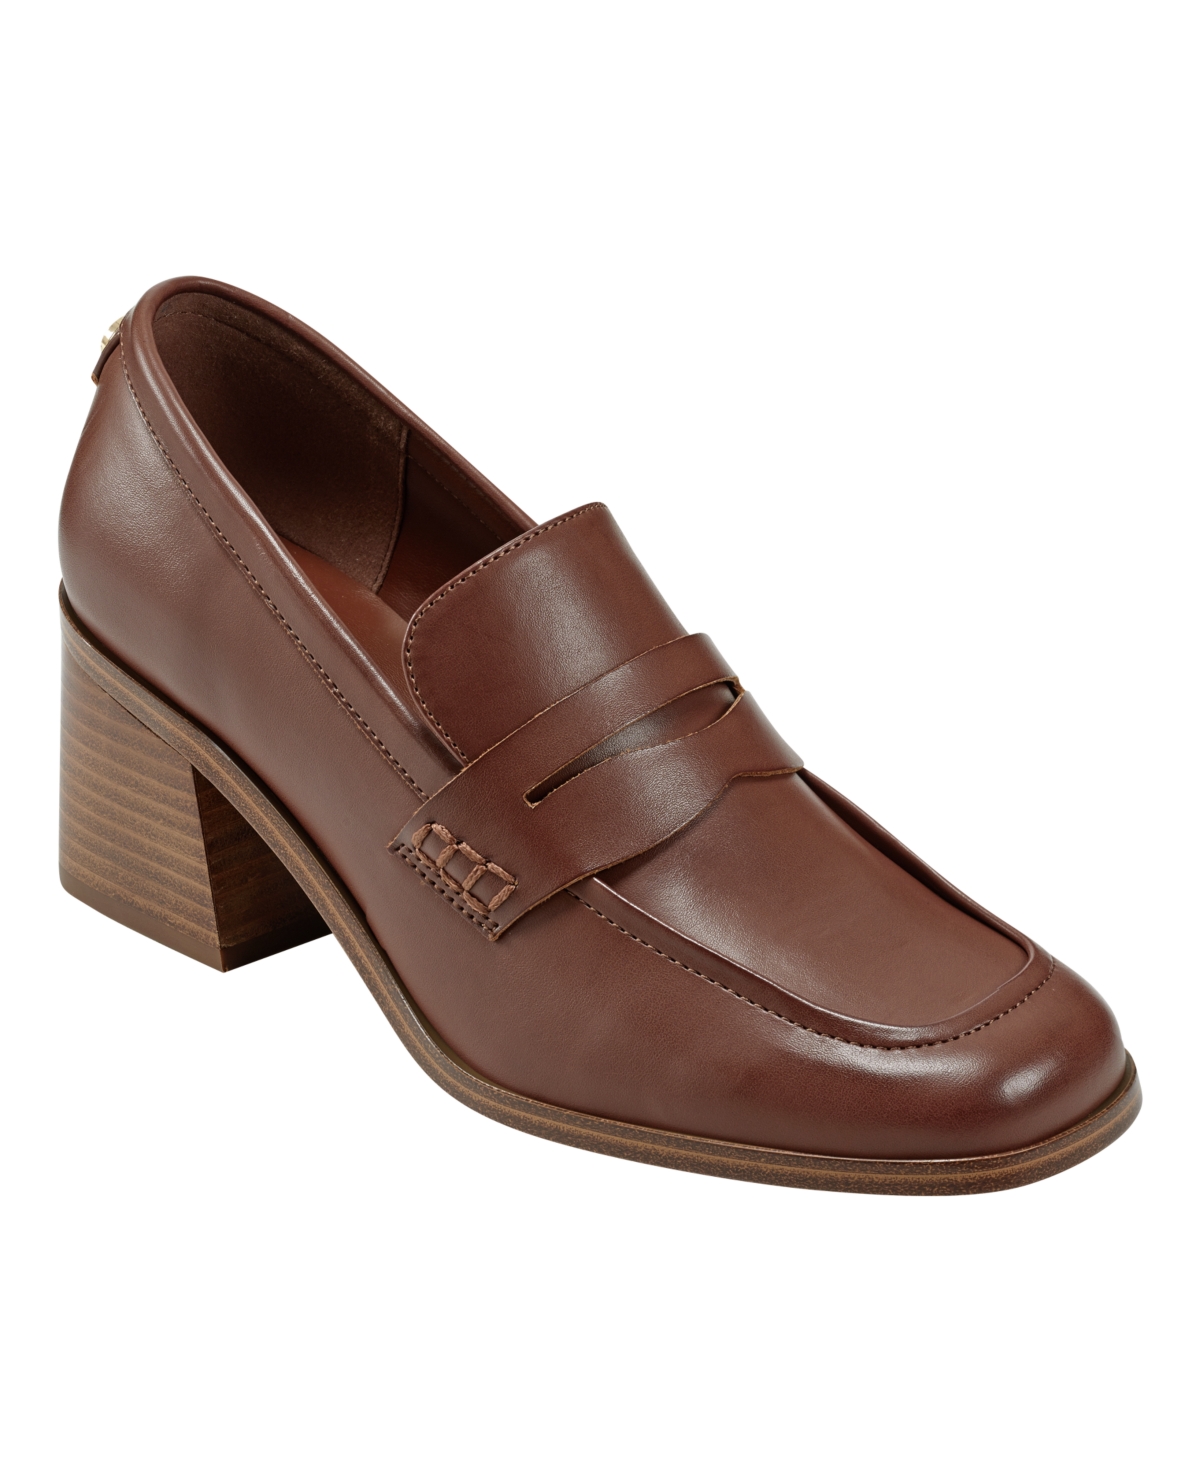 Women's Kchris Heeled Loafers - Dark Natural Faux Leather